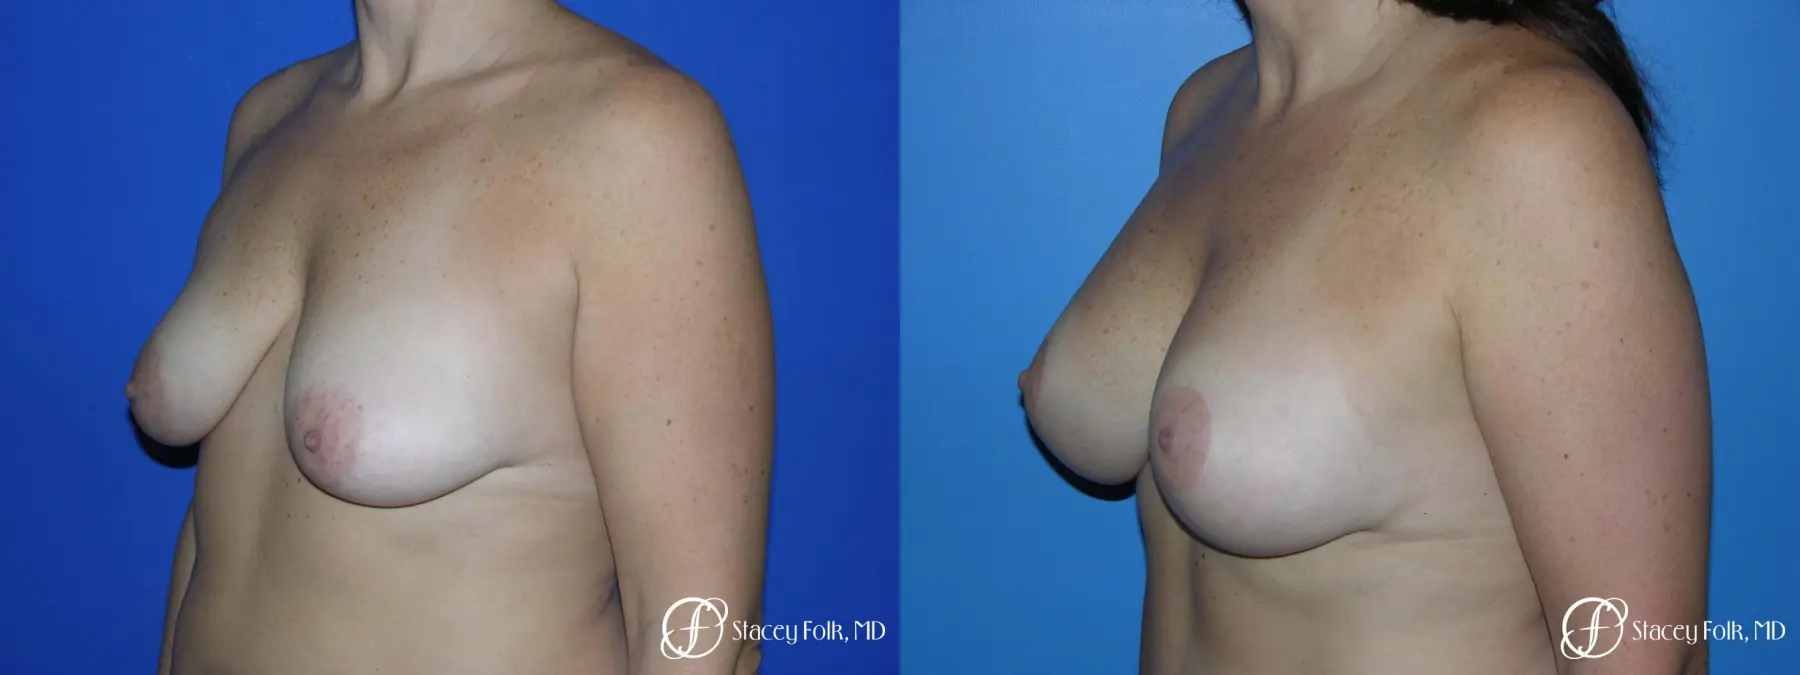 Denver Breast Lift - Mastopexy Augmentation 7989 - Before and After 2